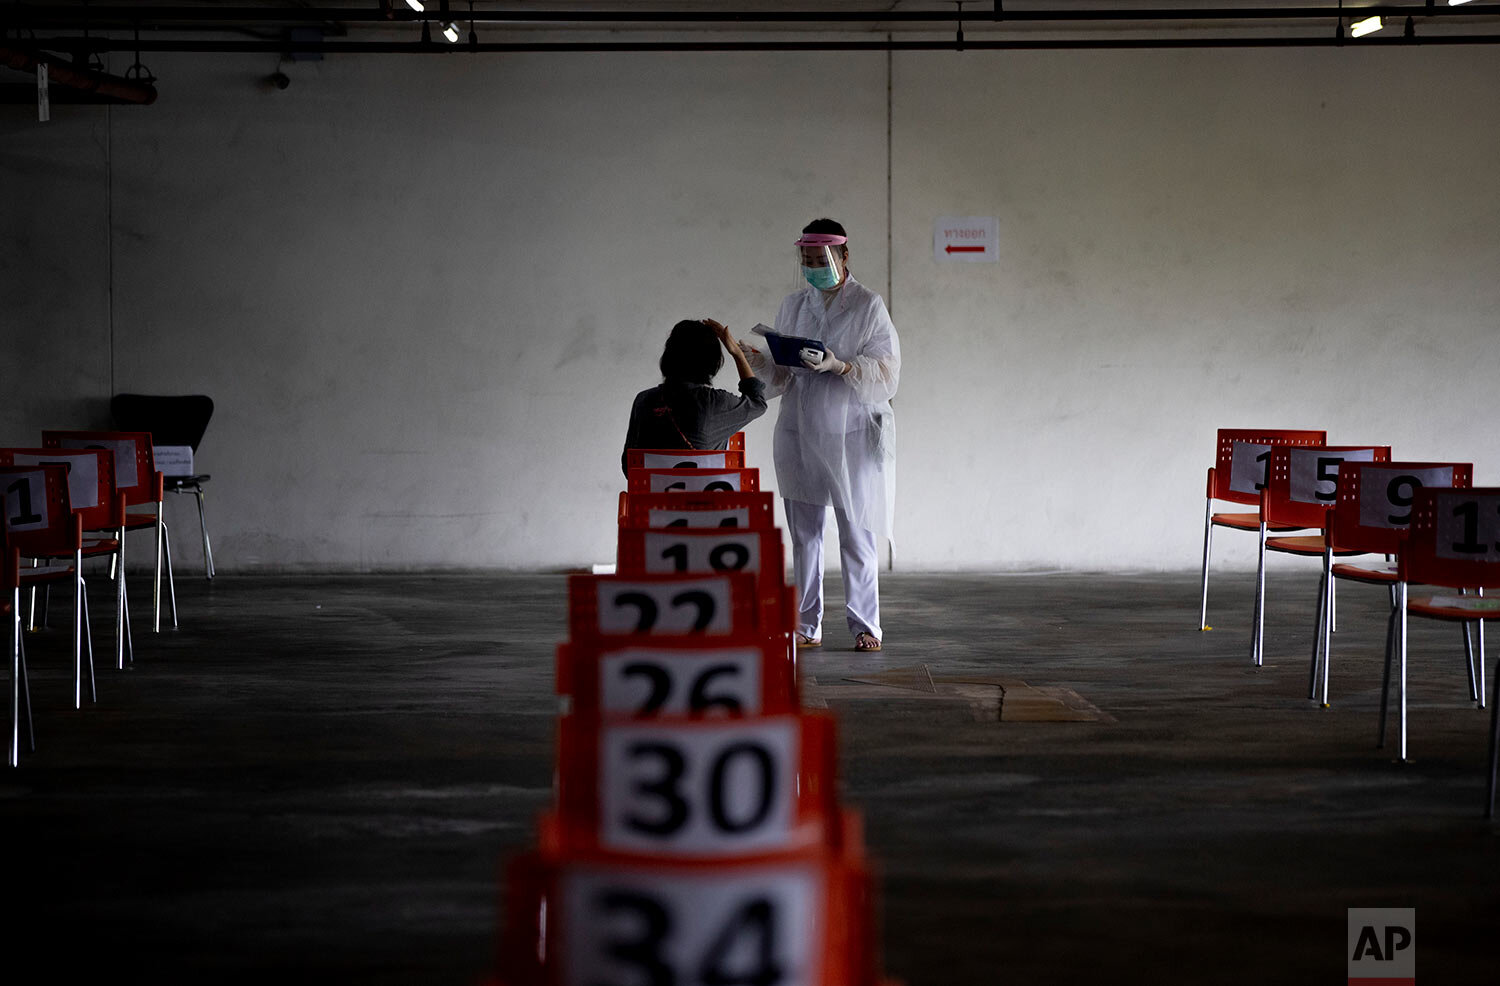  A nurse in protective clothing takes notes from a woman with symptoms of new coronavirus at a carpark that turned into a COVID-19 infection screening center at Chulalongkorn University health service center in Bangkok, Thailand, Wednesday, April 1, 